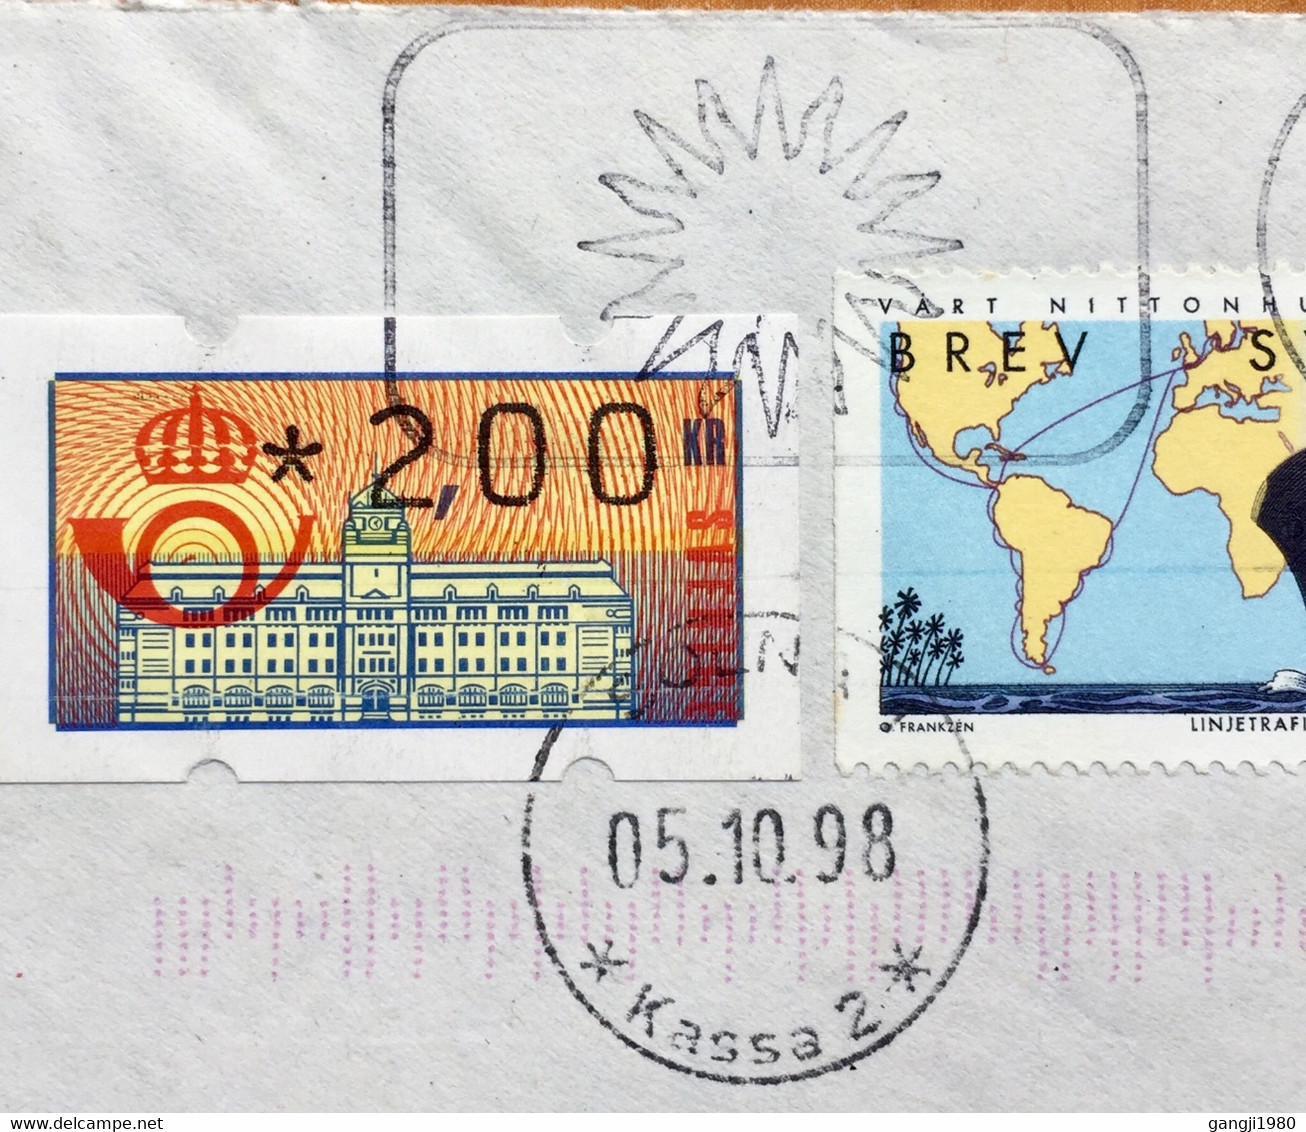 SWEDEN 1998, AIRMAIL COVER TO UK ATM STAMP ,SELF ADHESIVE STAMPS ,SHIP ,GLOBE,POST HORN ,BUILDING ,PICTURAL CANCELLATIO - Covers & Documents